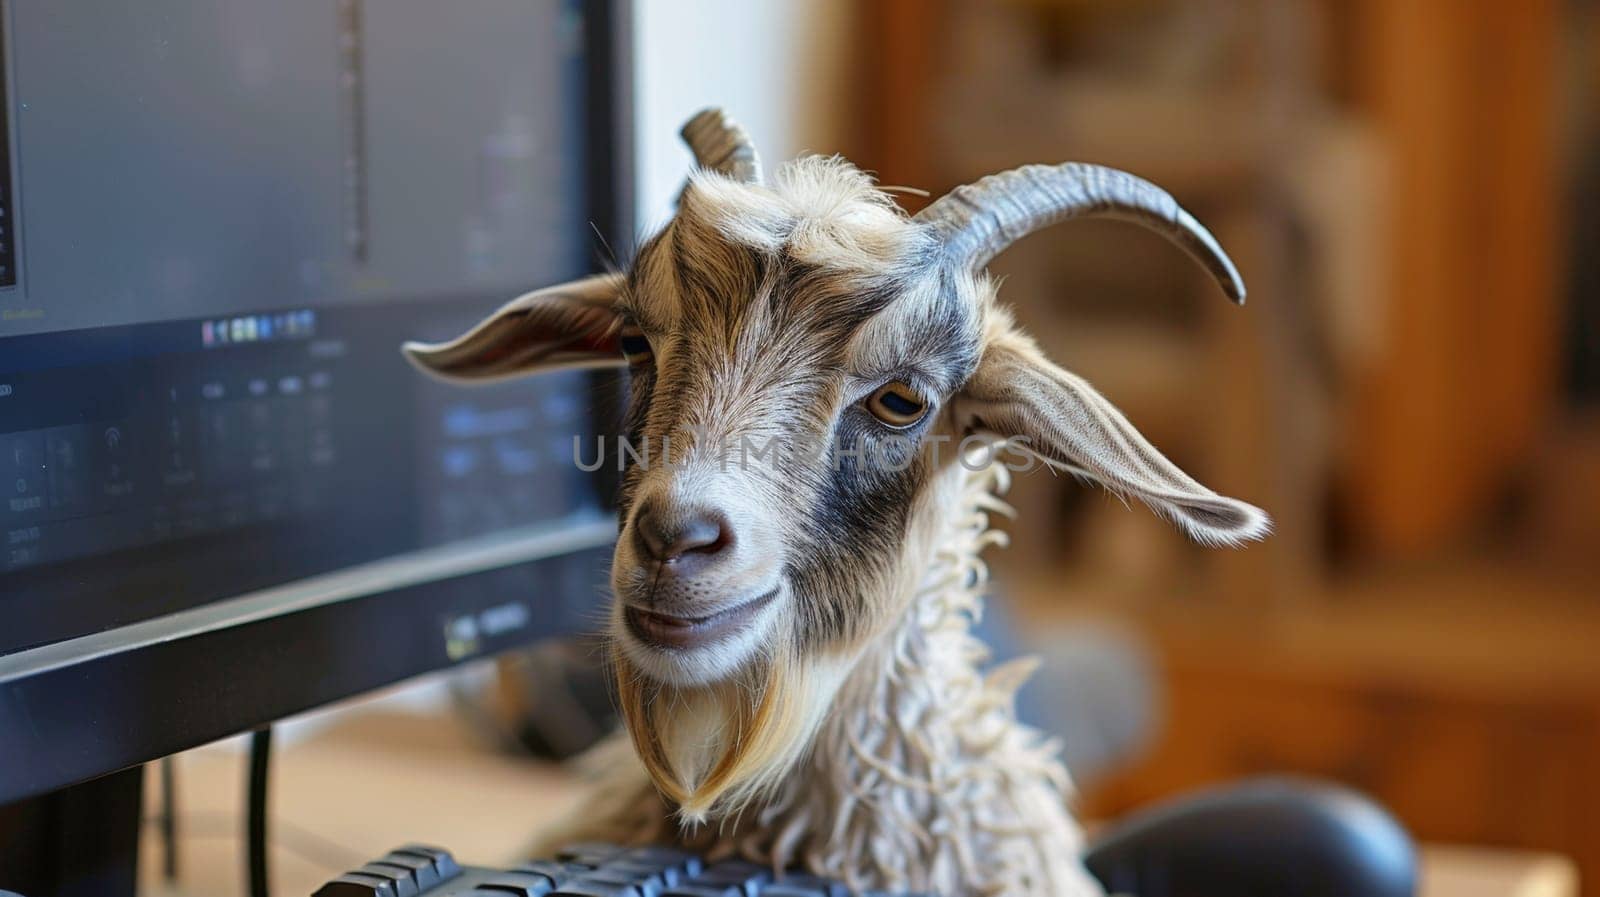 A goat is sitting next to a computer monitor with its head in front of it